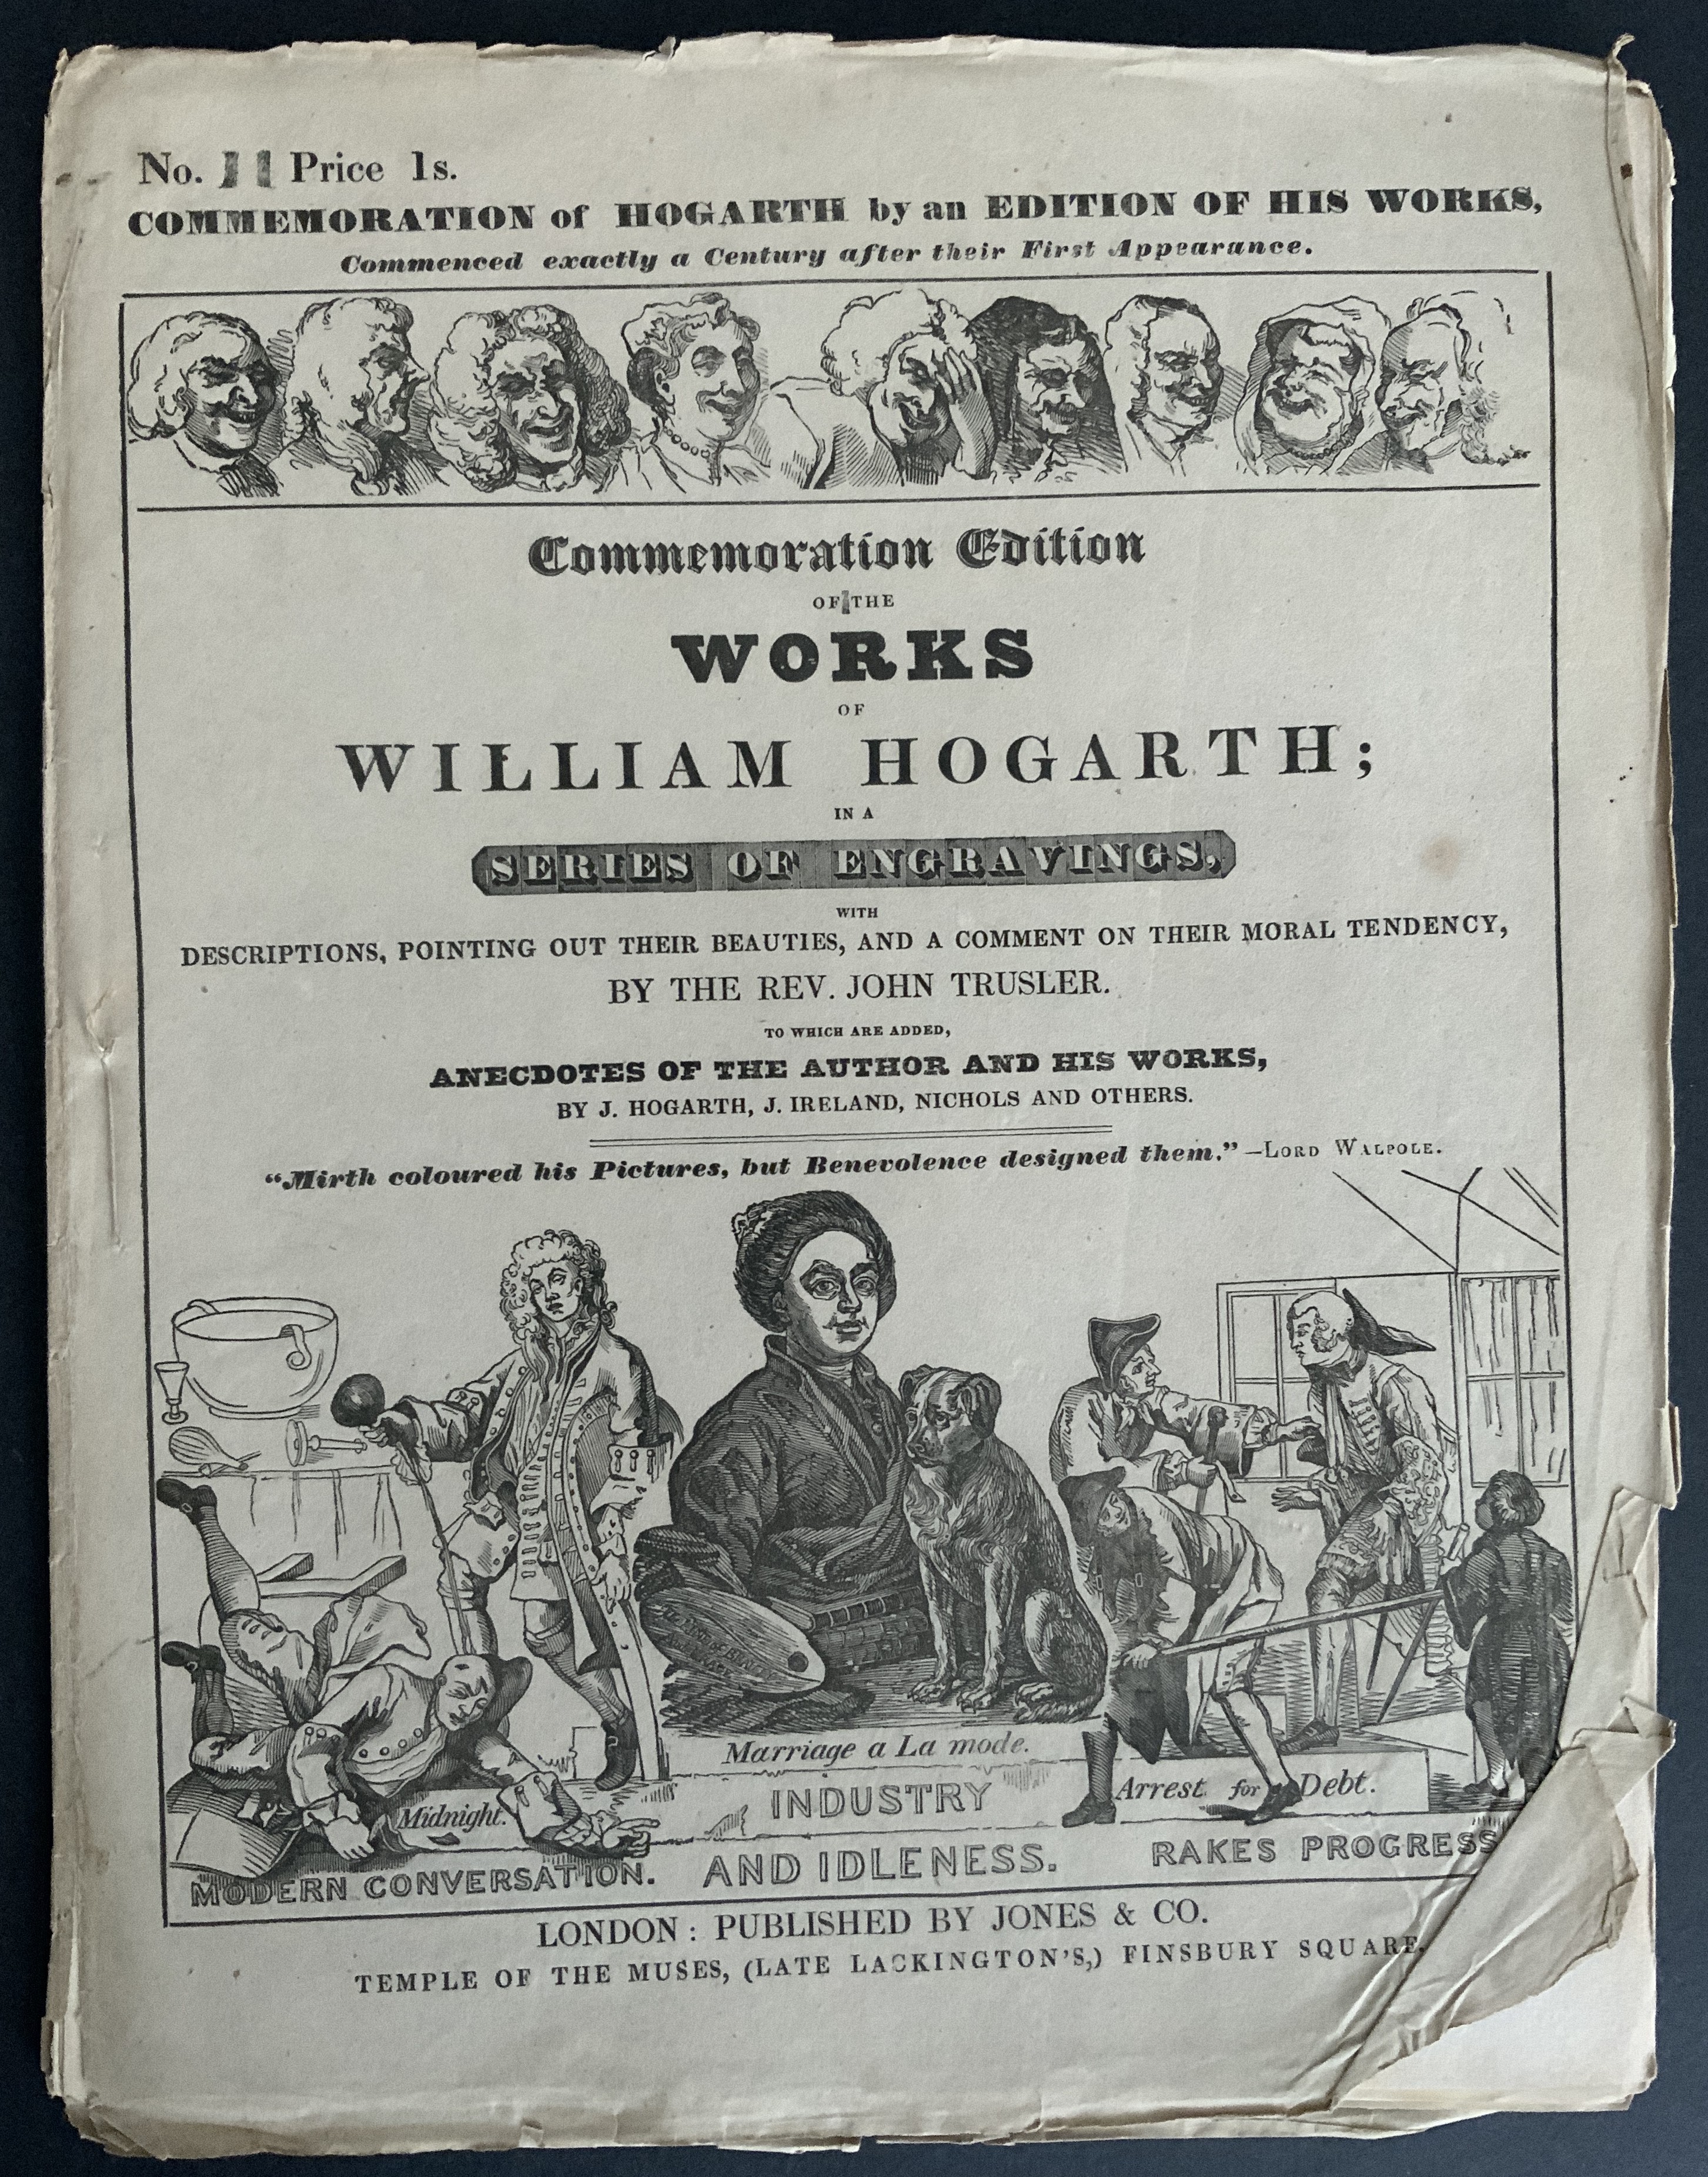 FOUR MAGAZINES OF COMMEMORATION EDITION OF THE WORKS OF WILLIAM HOGARTH IN THE SERIES OF ENGRAVINGS - Image 5 of 8